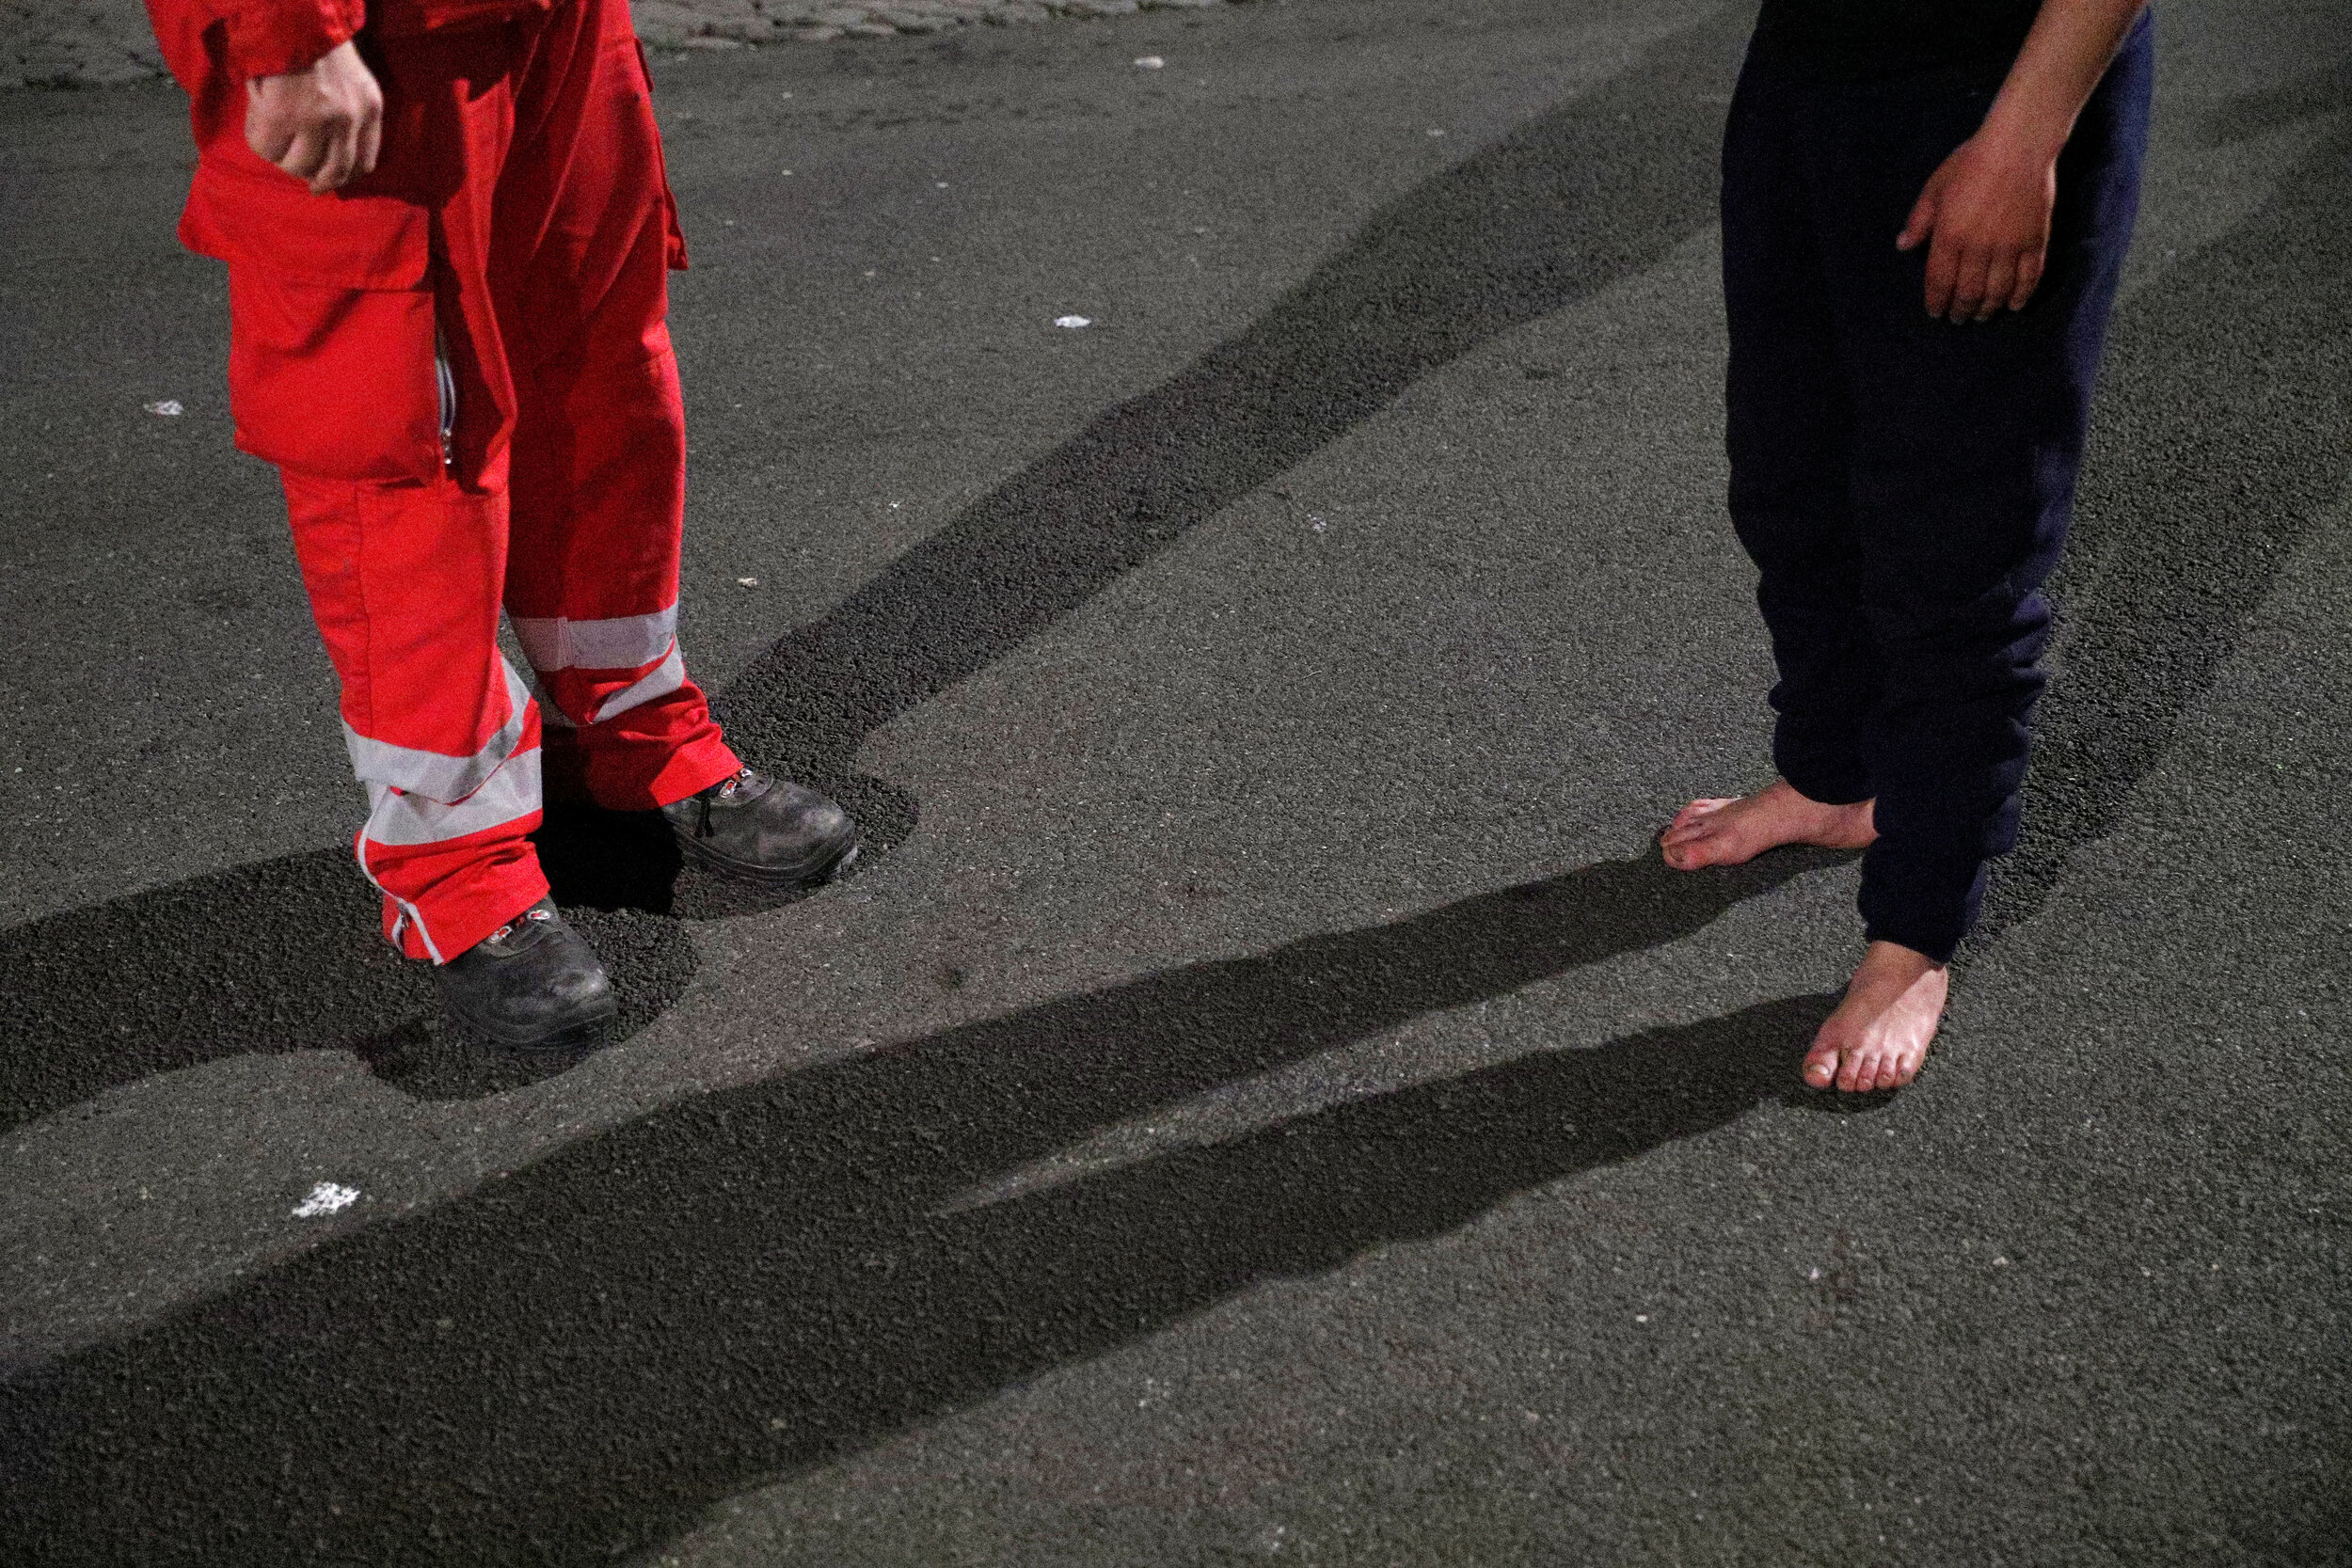  A barefoot homeless person stands next to a Red Cross worker in Rome, Italy, March 17, 2020. Since the coronavirus crisis, Red Cross workers have been increasing their daily activities to meet the growing needs of the homeless in Rome.  